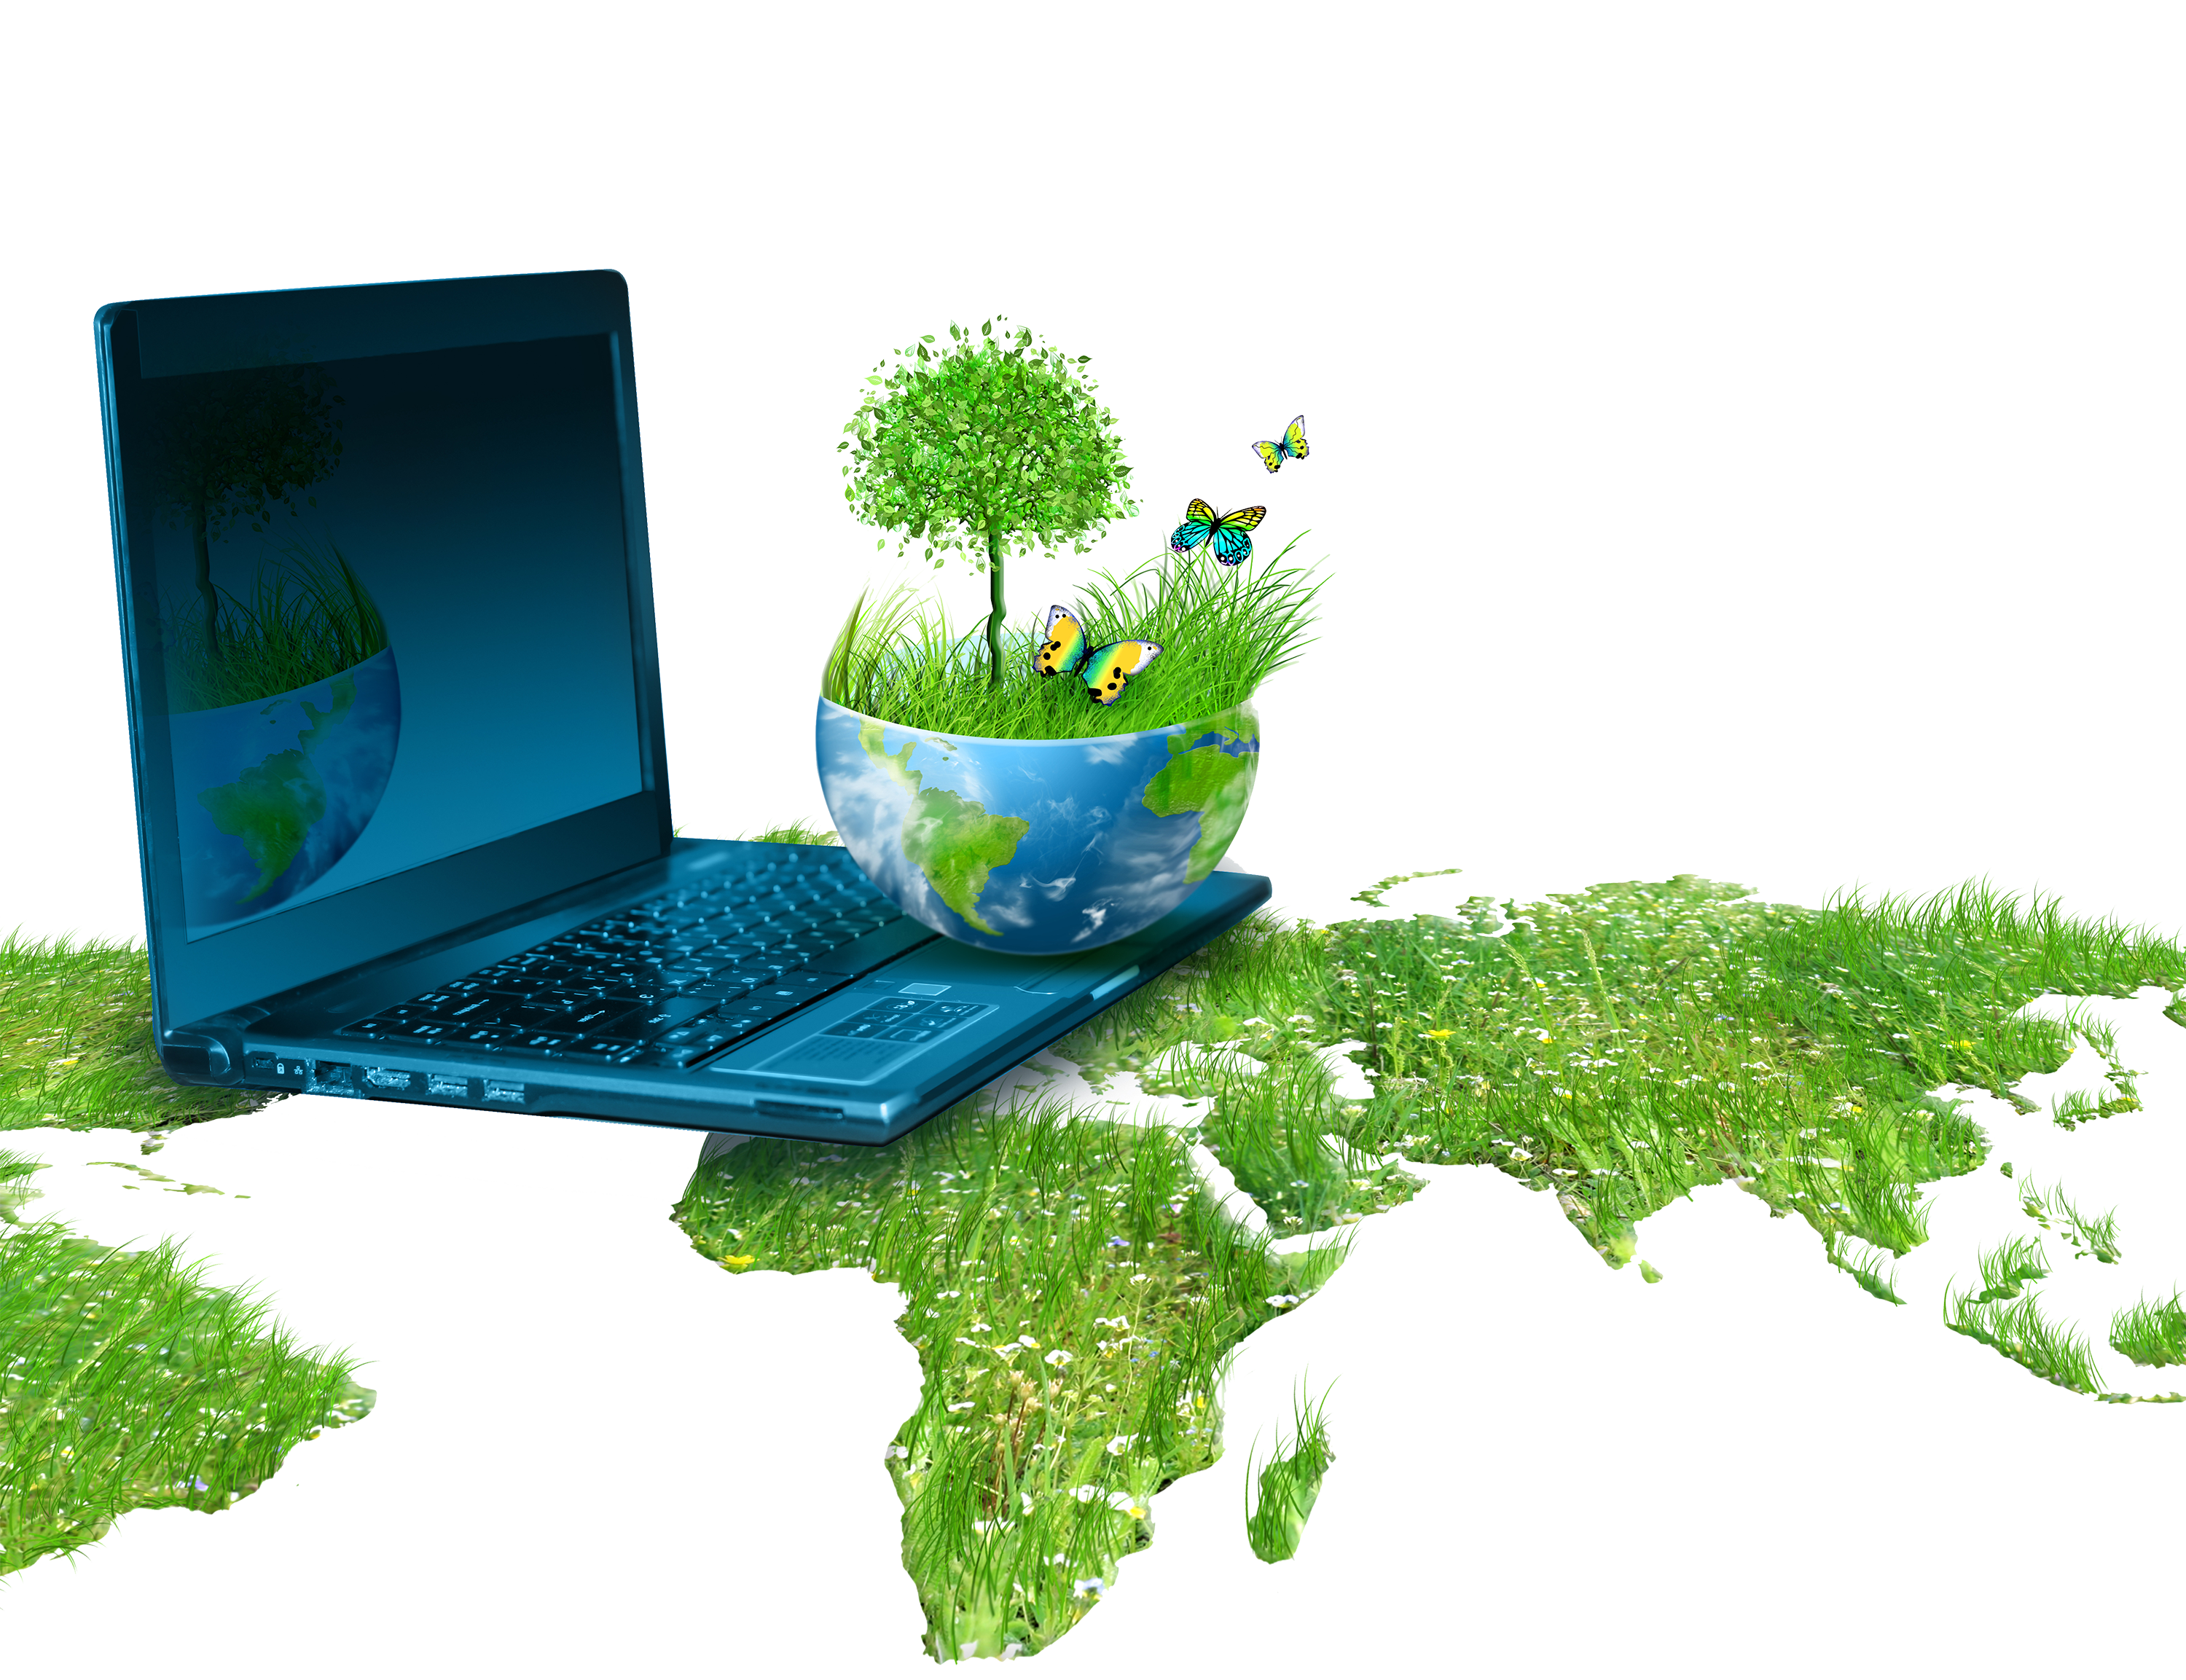 Electronic Waste Computer Recycling Waste Management Floral Laptop Stock Photo Efecce5b8e01fa212c26c3ae6efcf376